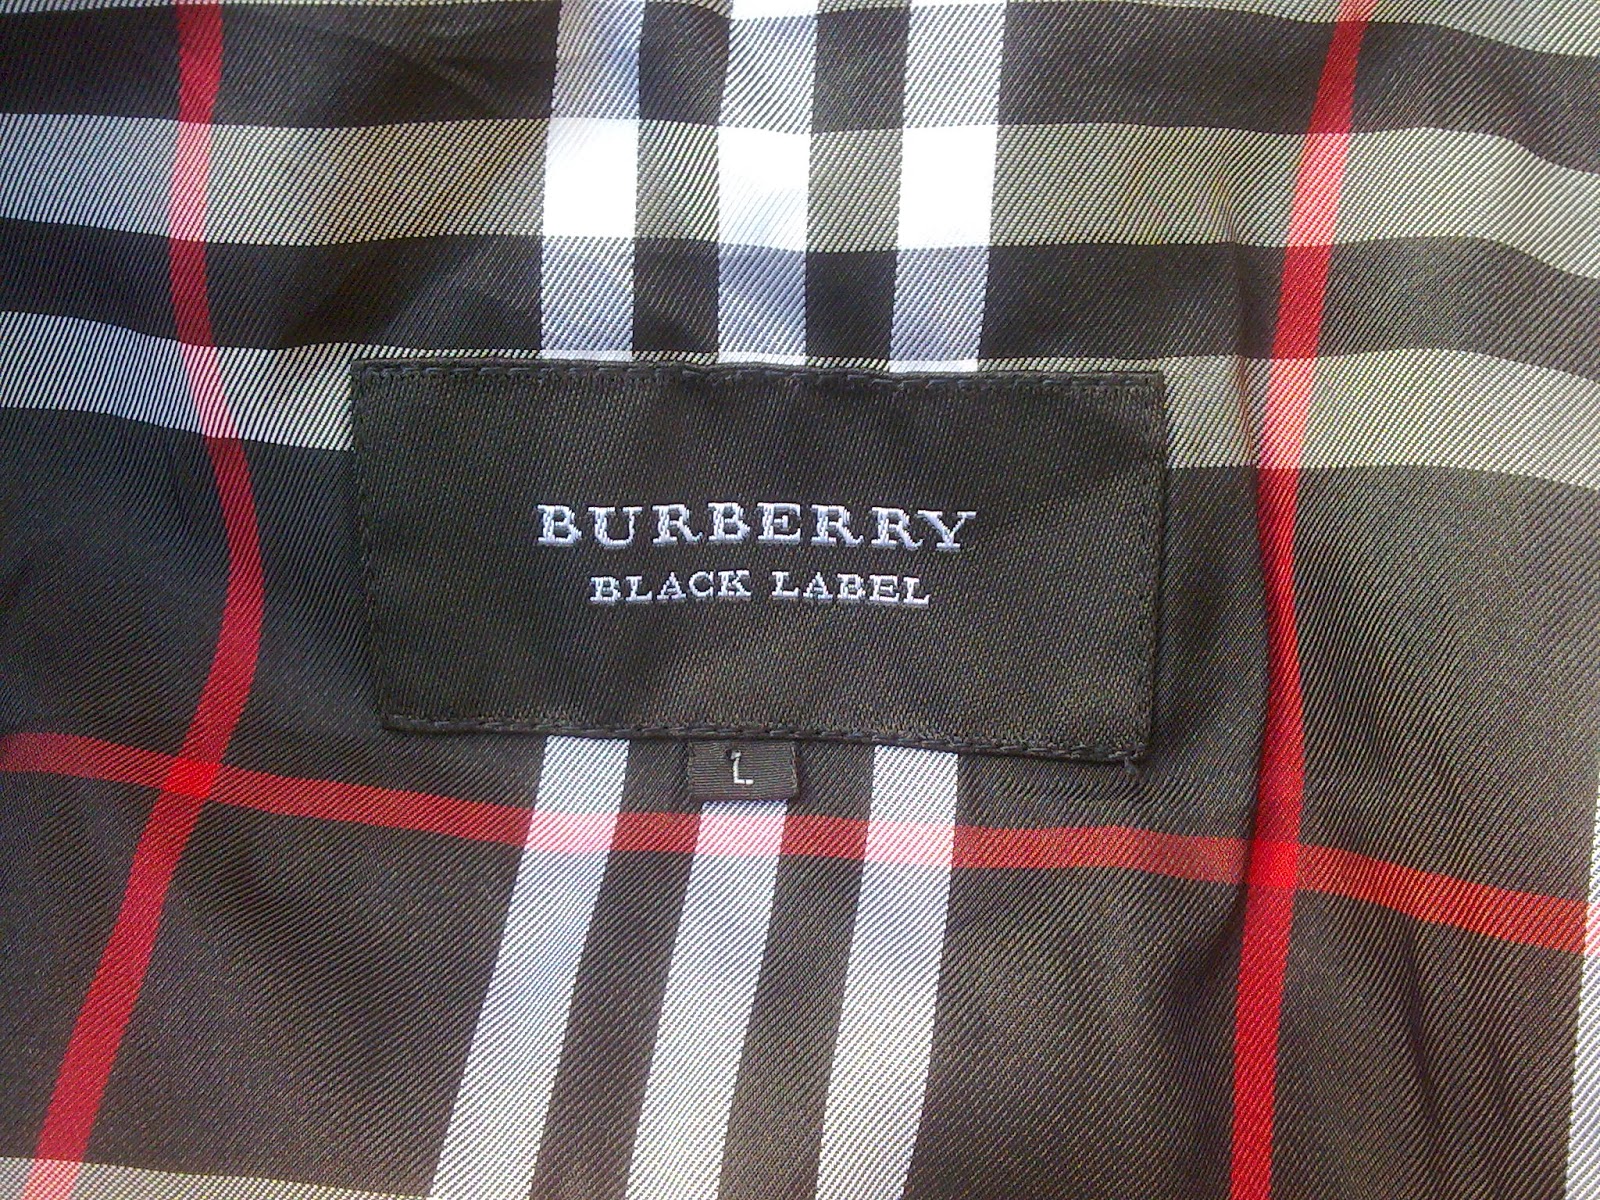 d0rayakEEbaG: Authentic Burberry Black Label Jacket(SOLD)